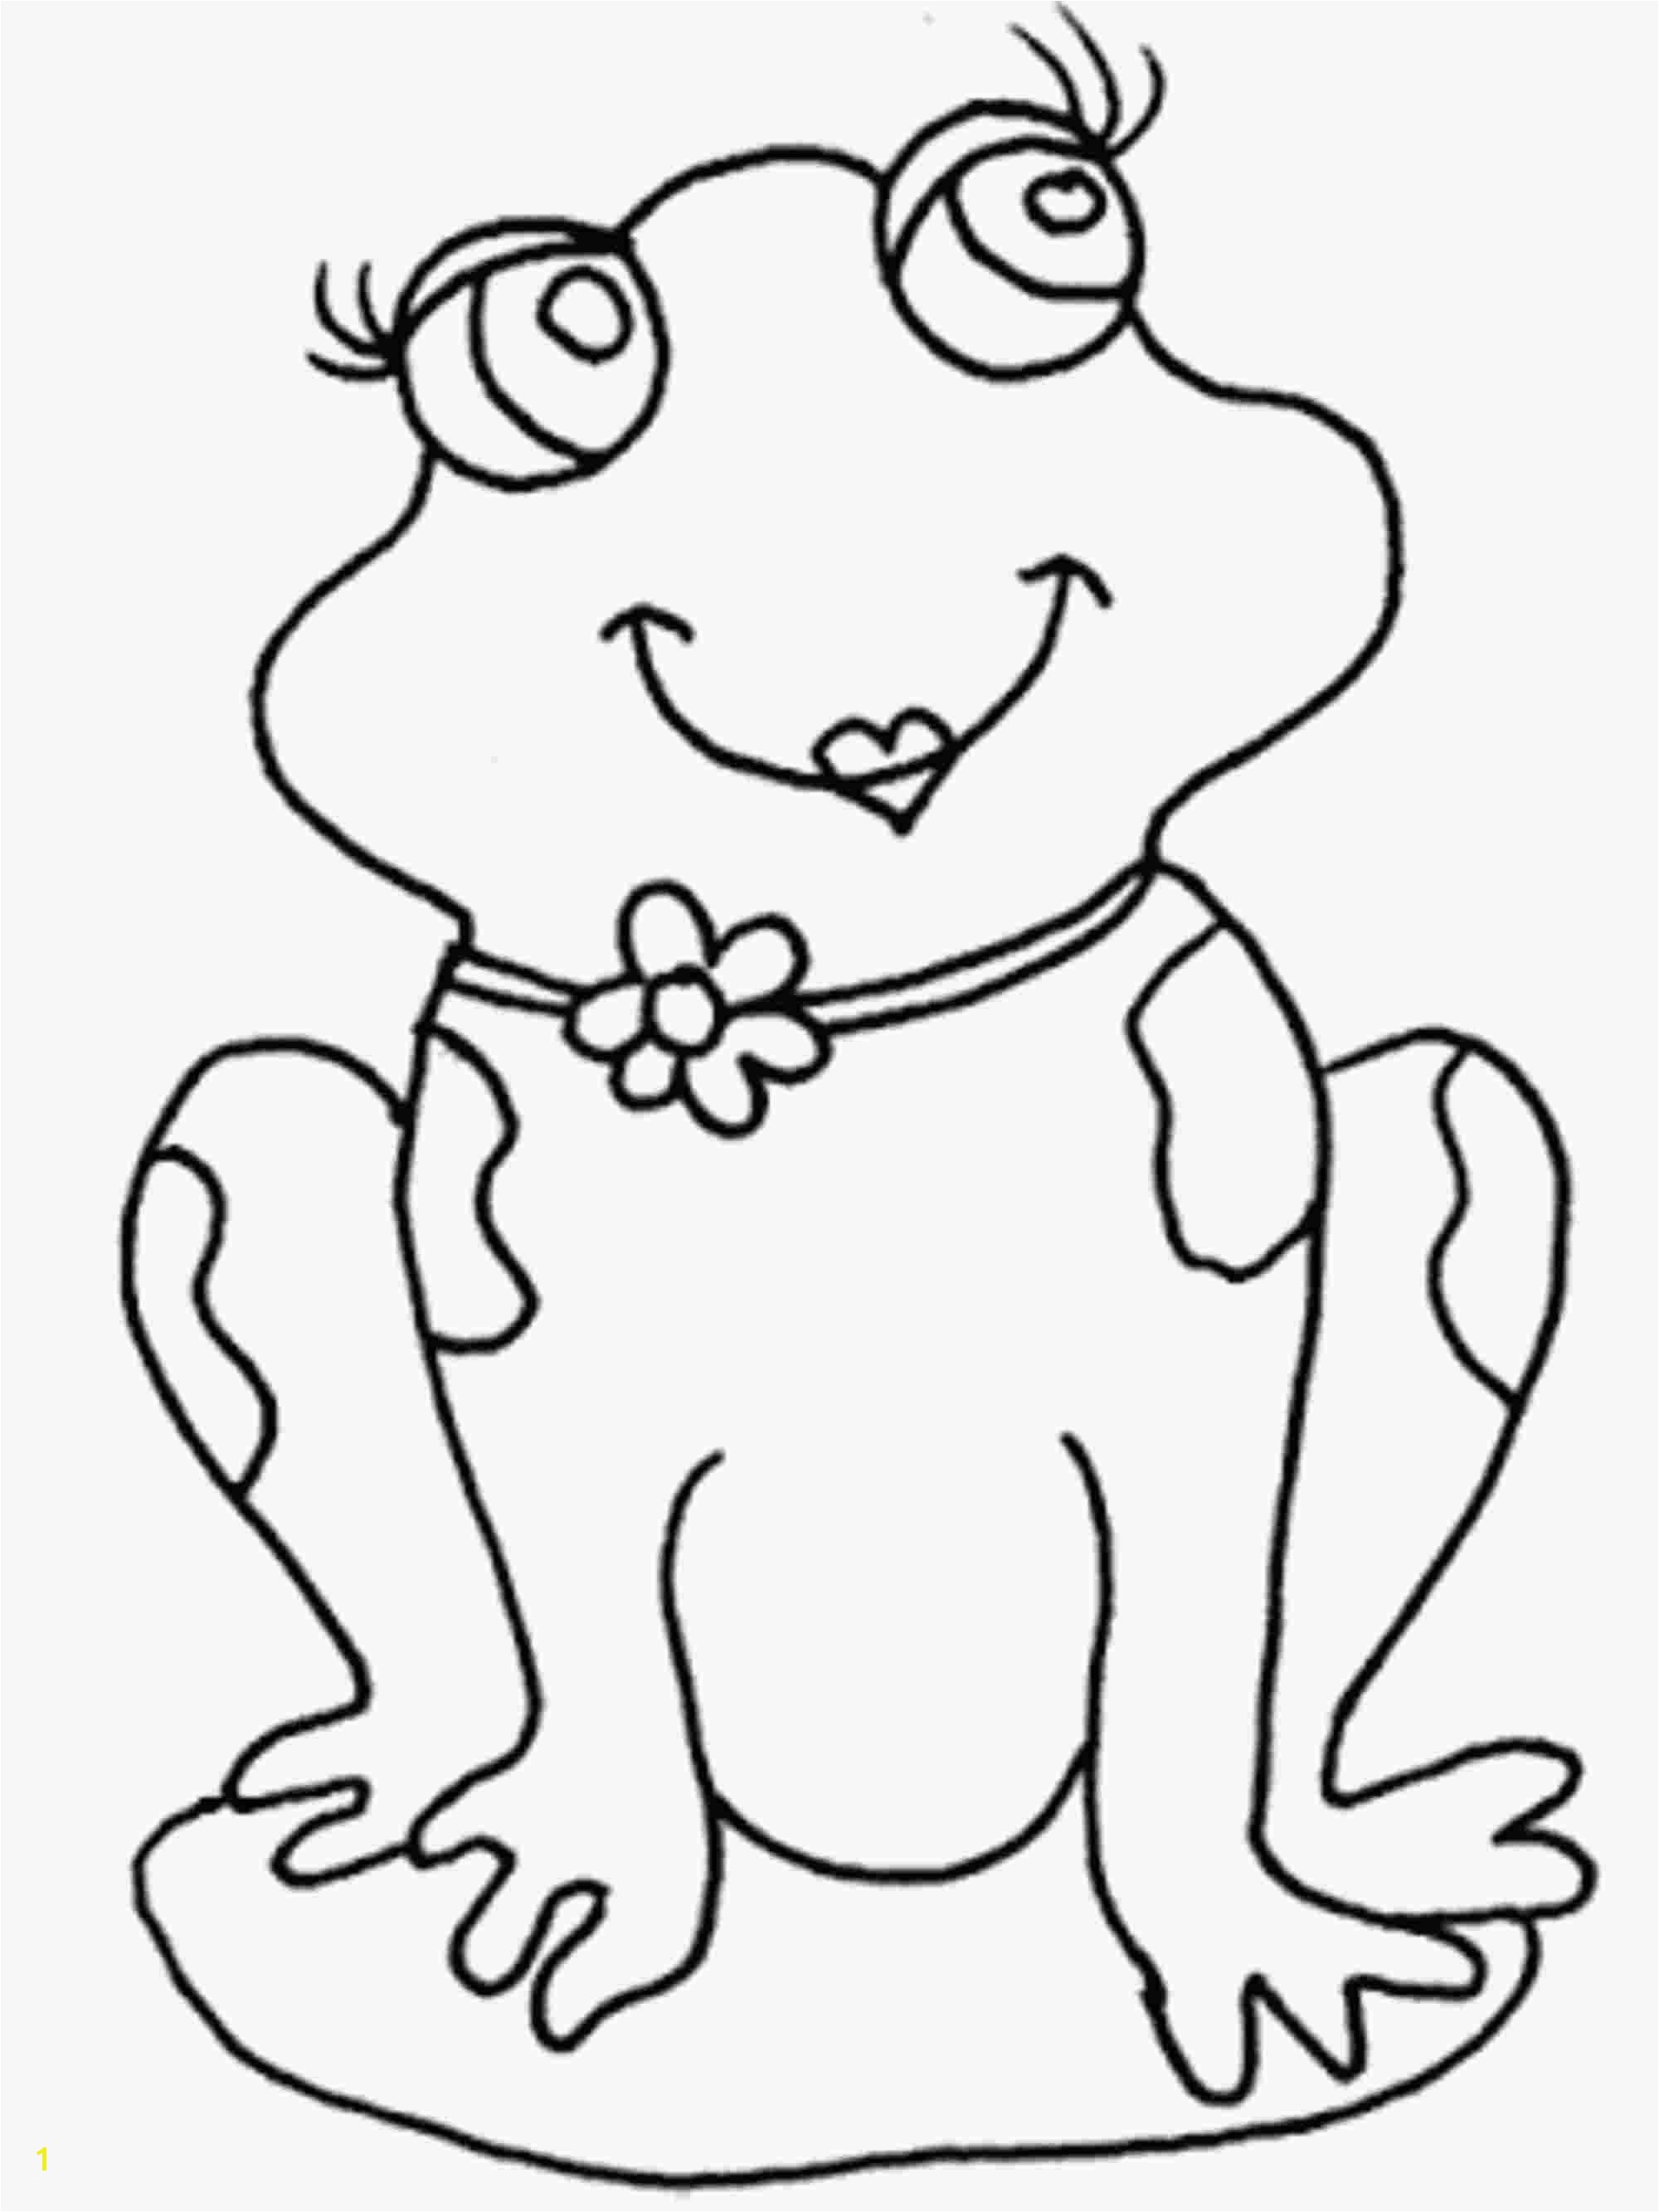 Frog and Lily Pad Coloring Pages 13 Awesome Lily Pad Coloring Page